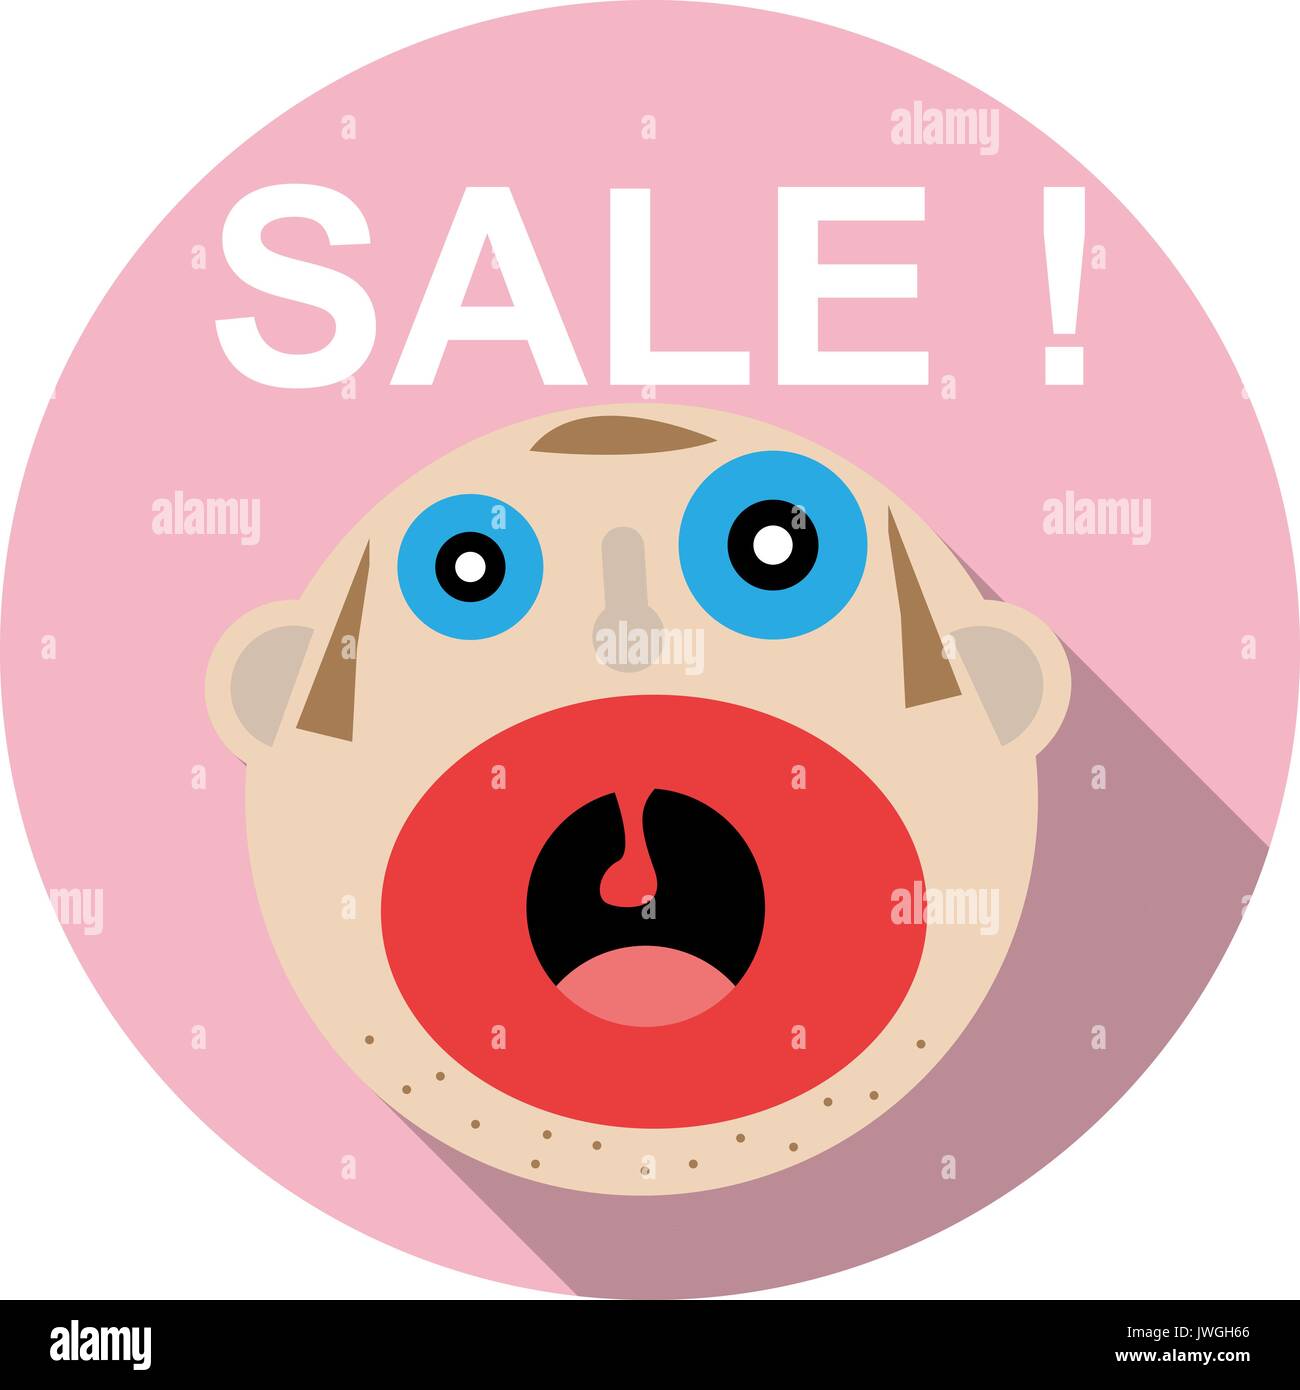 Sale circle icon with face in flat design Stock Vector